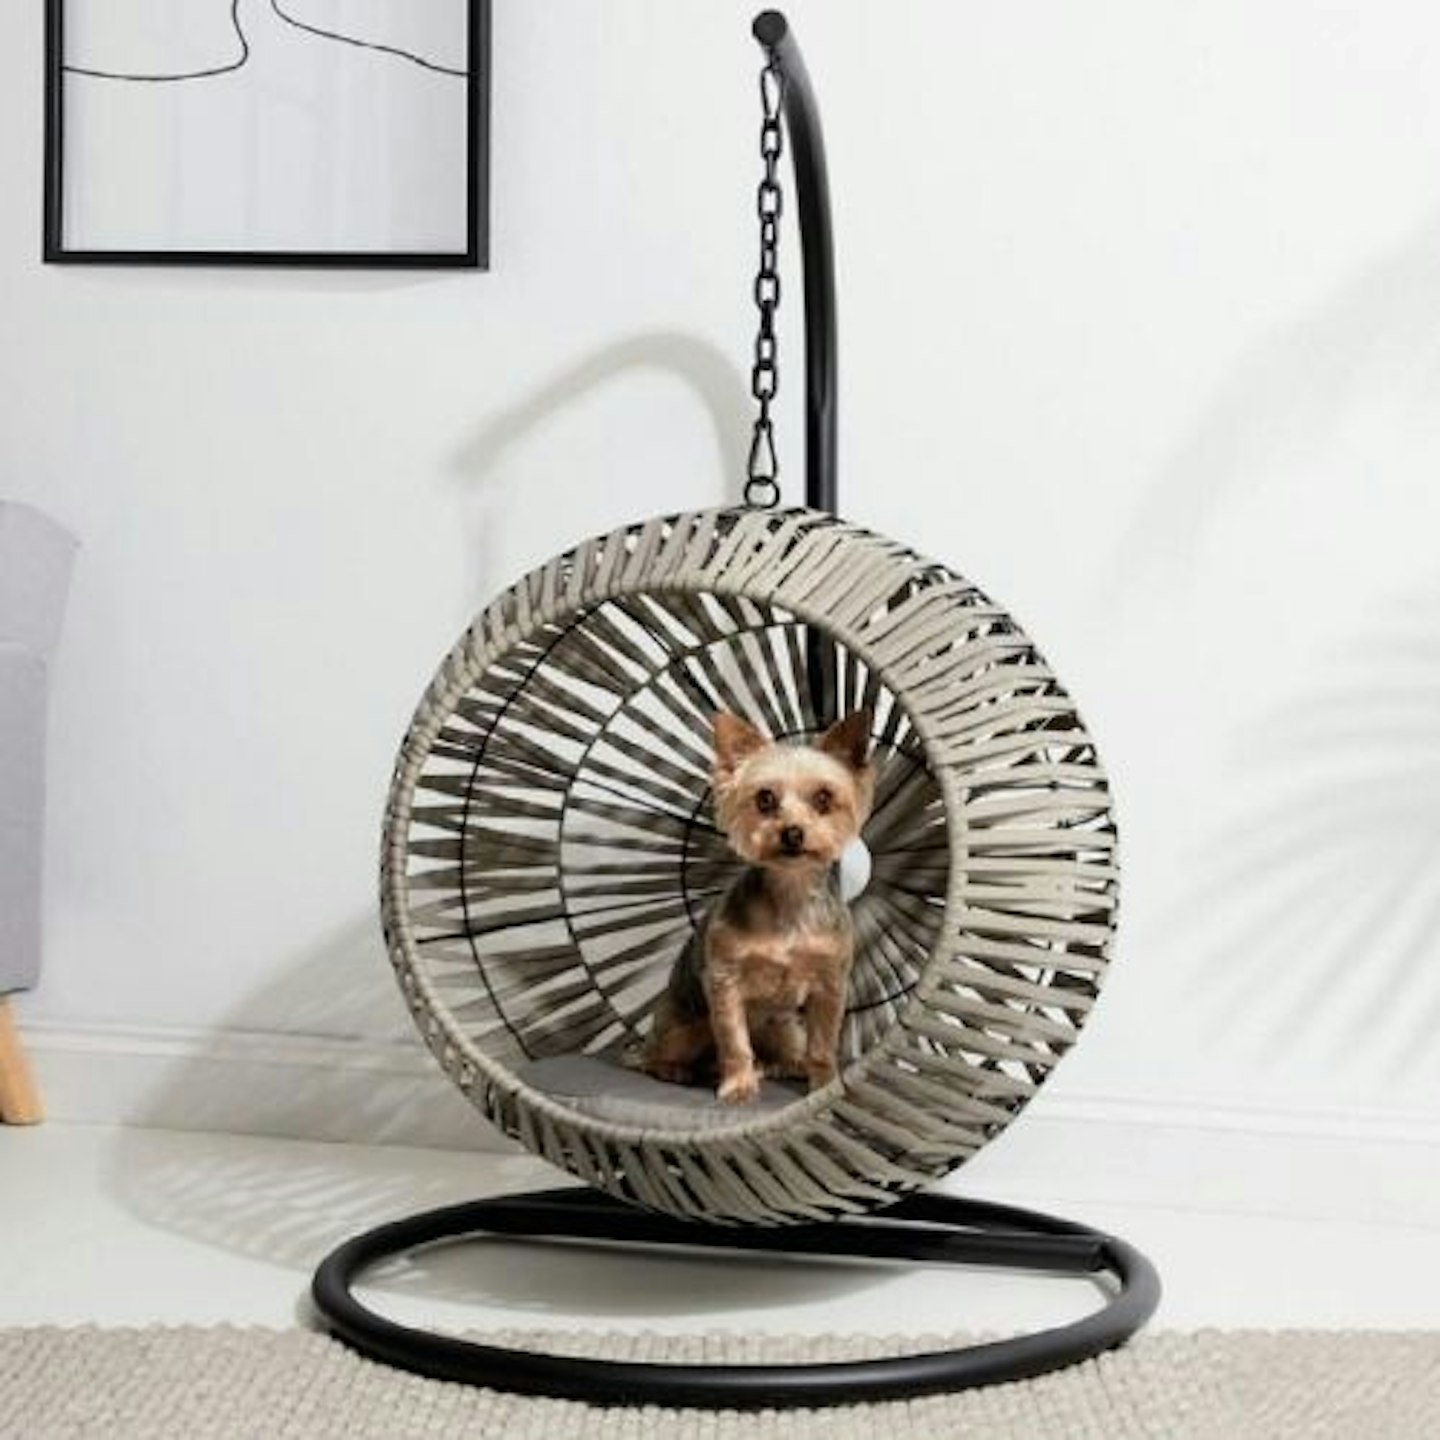 New Indoor Outdoor Comfortable Pet Hanging Egg Chair Grey Perfect Place to Relax